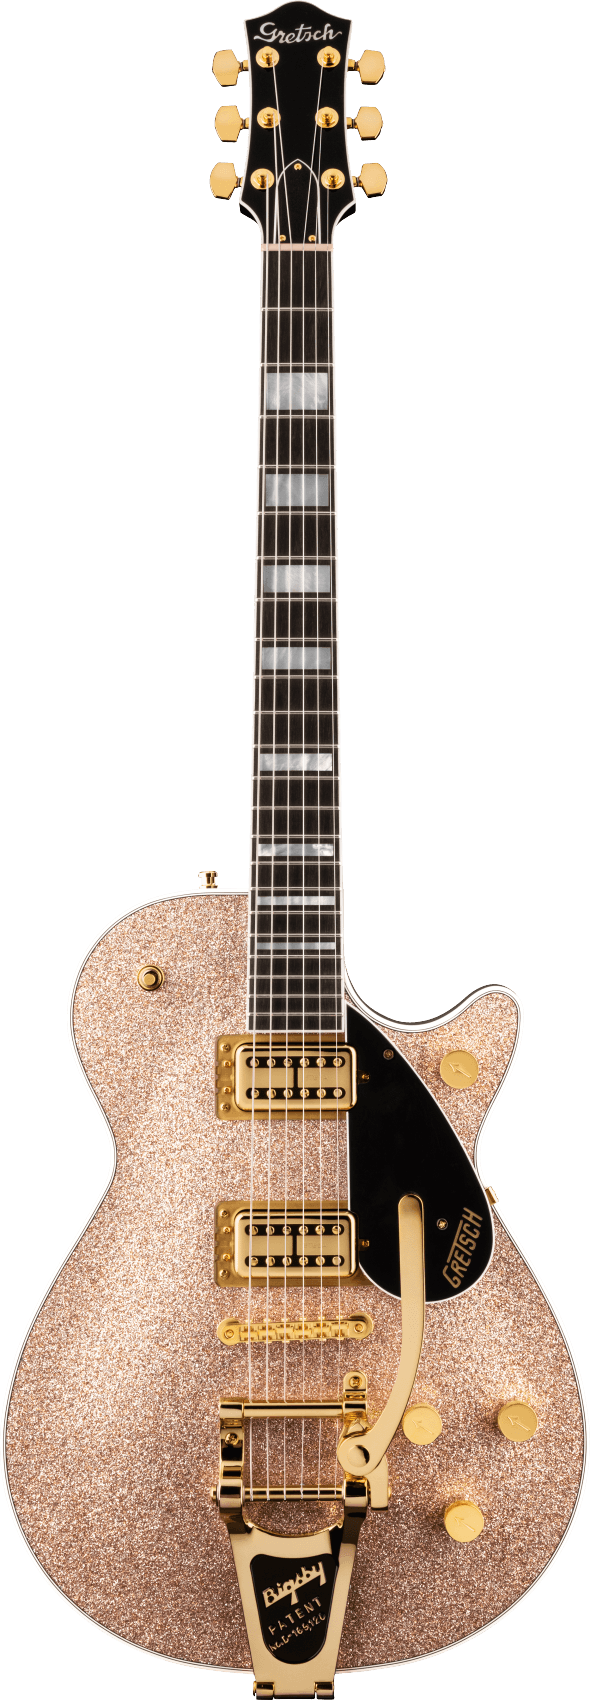 G6229TG Limited Edition Players Edition Sparkle Jet BT with Bigsby and Gold Hardware Ebony Fingerboard Champagne Sparkle